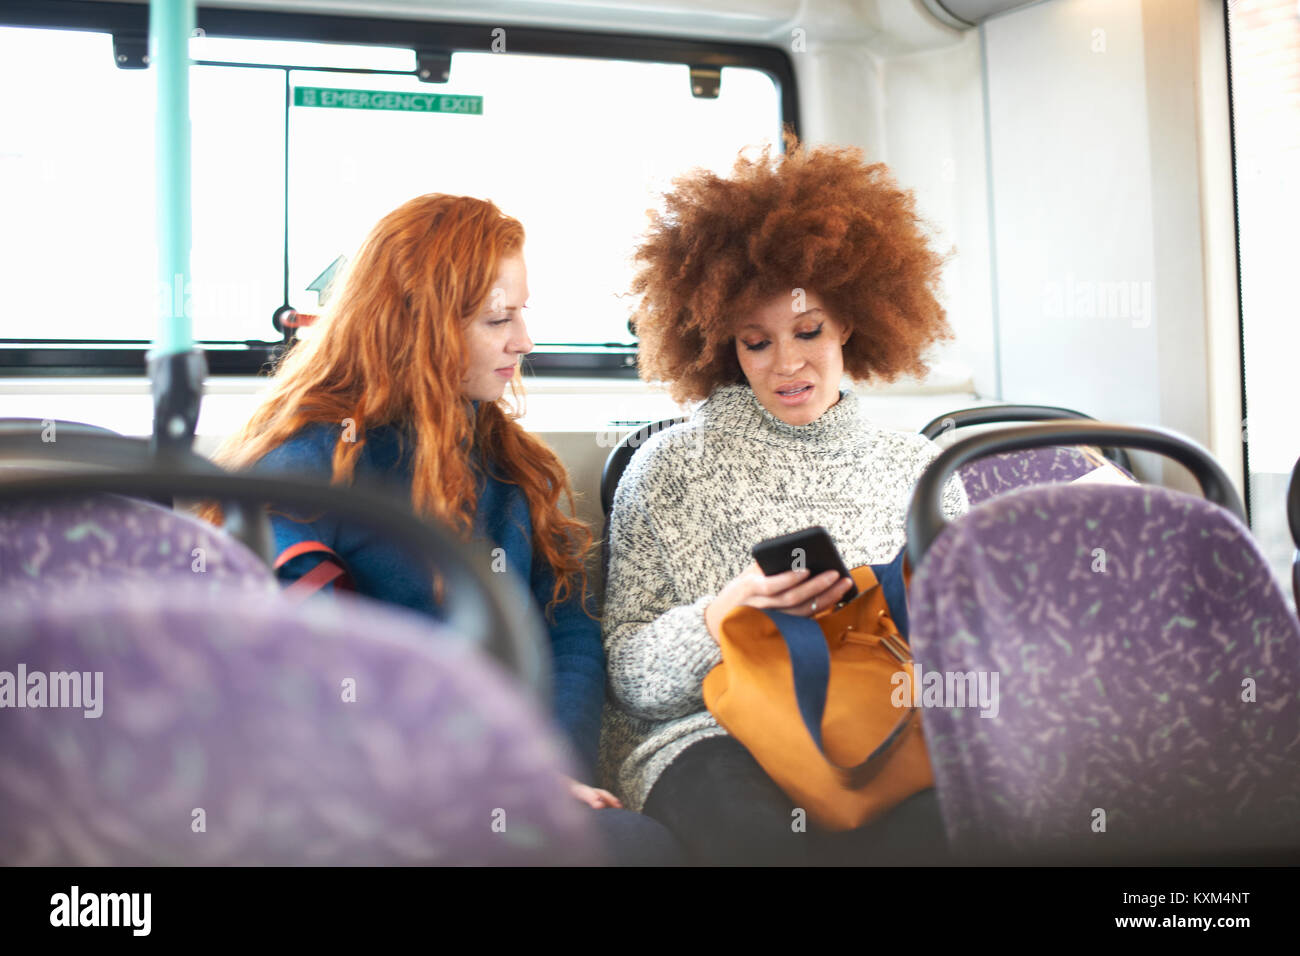 Two young women sitting on bus,looking at smartphone Stock Photo